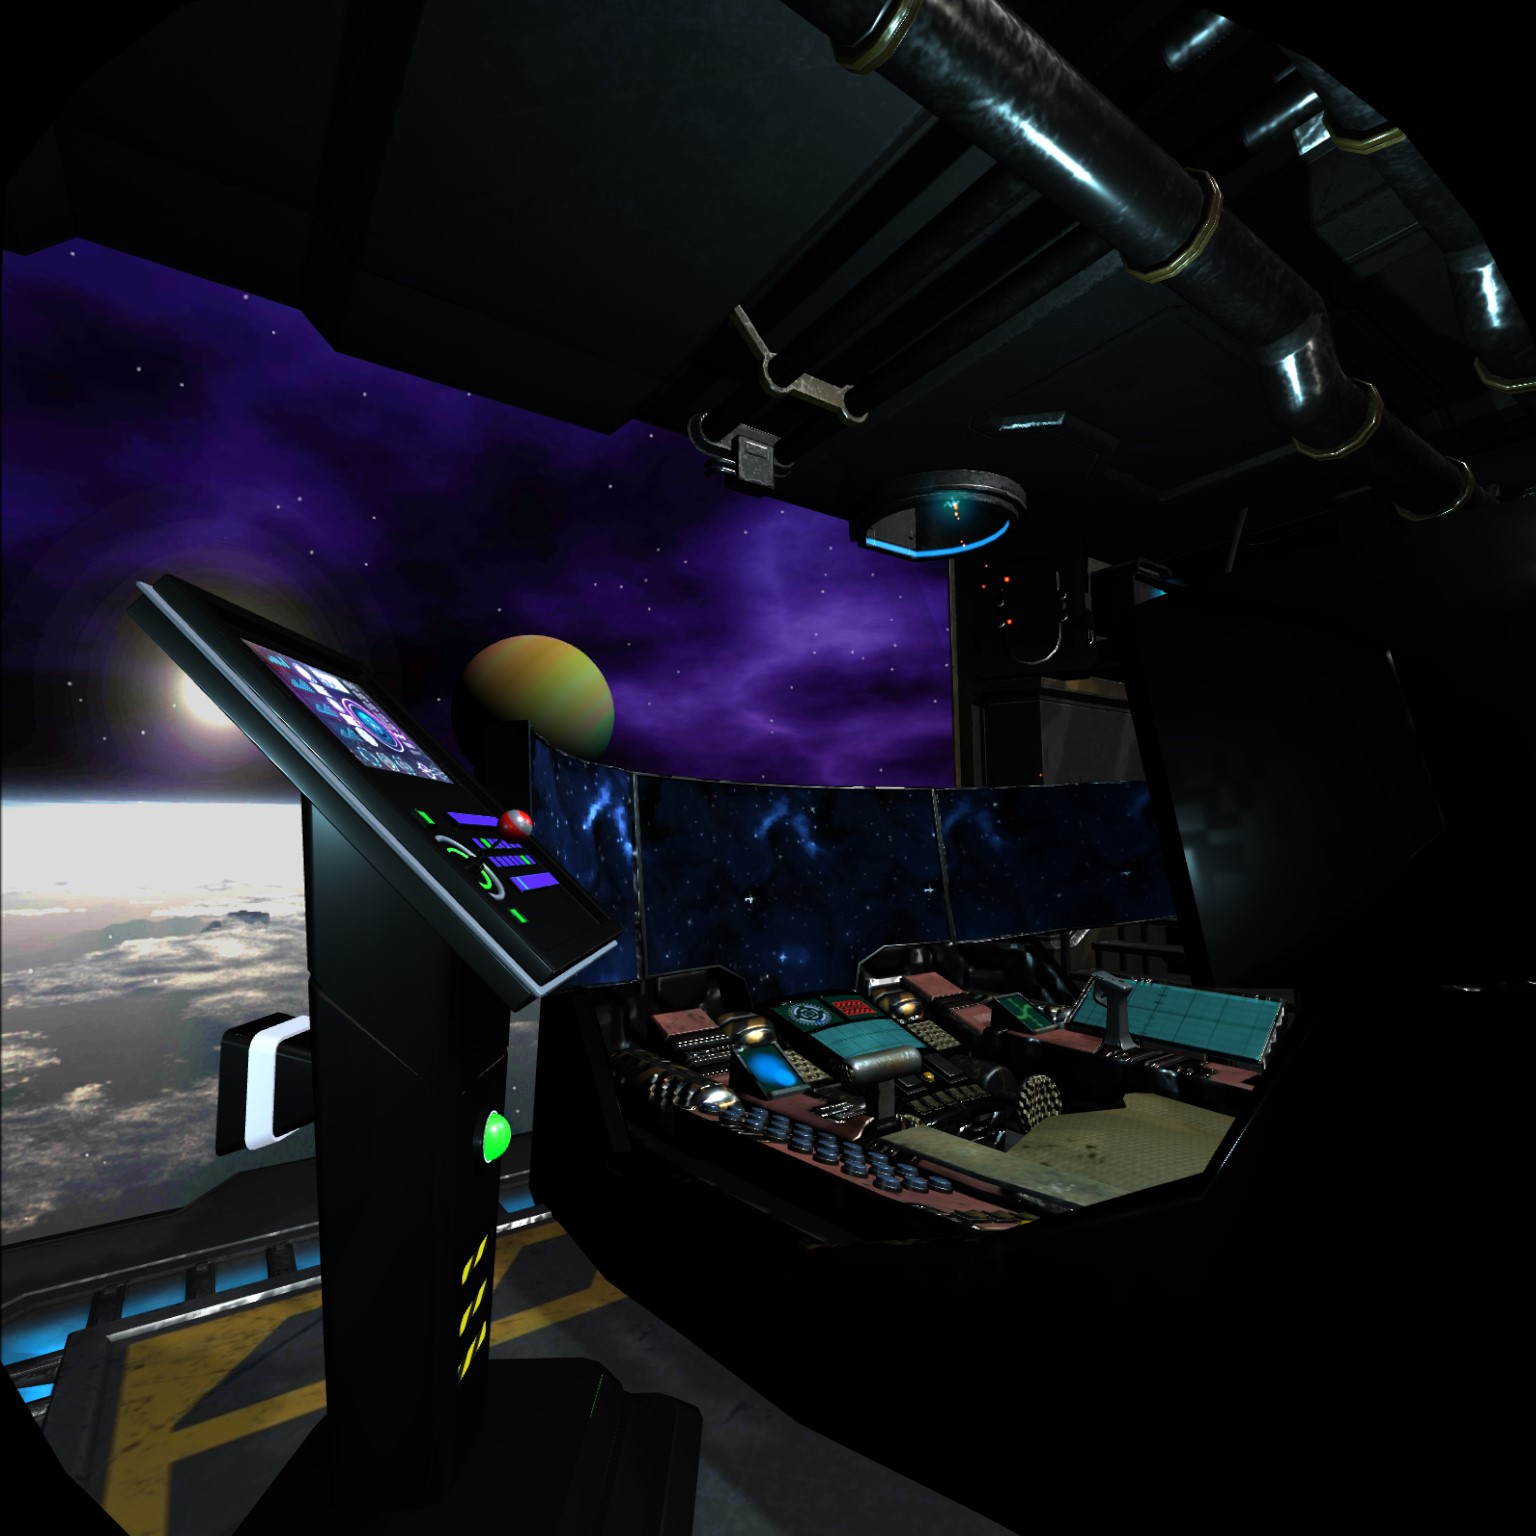 Cockpit Photo 2: Prototype of pilot control station from a different angle.